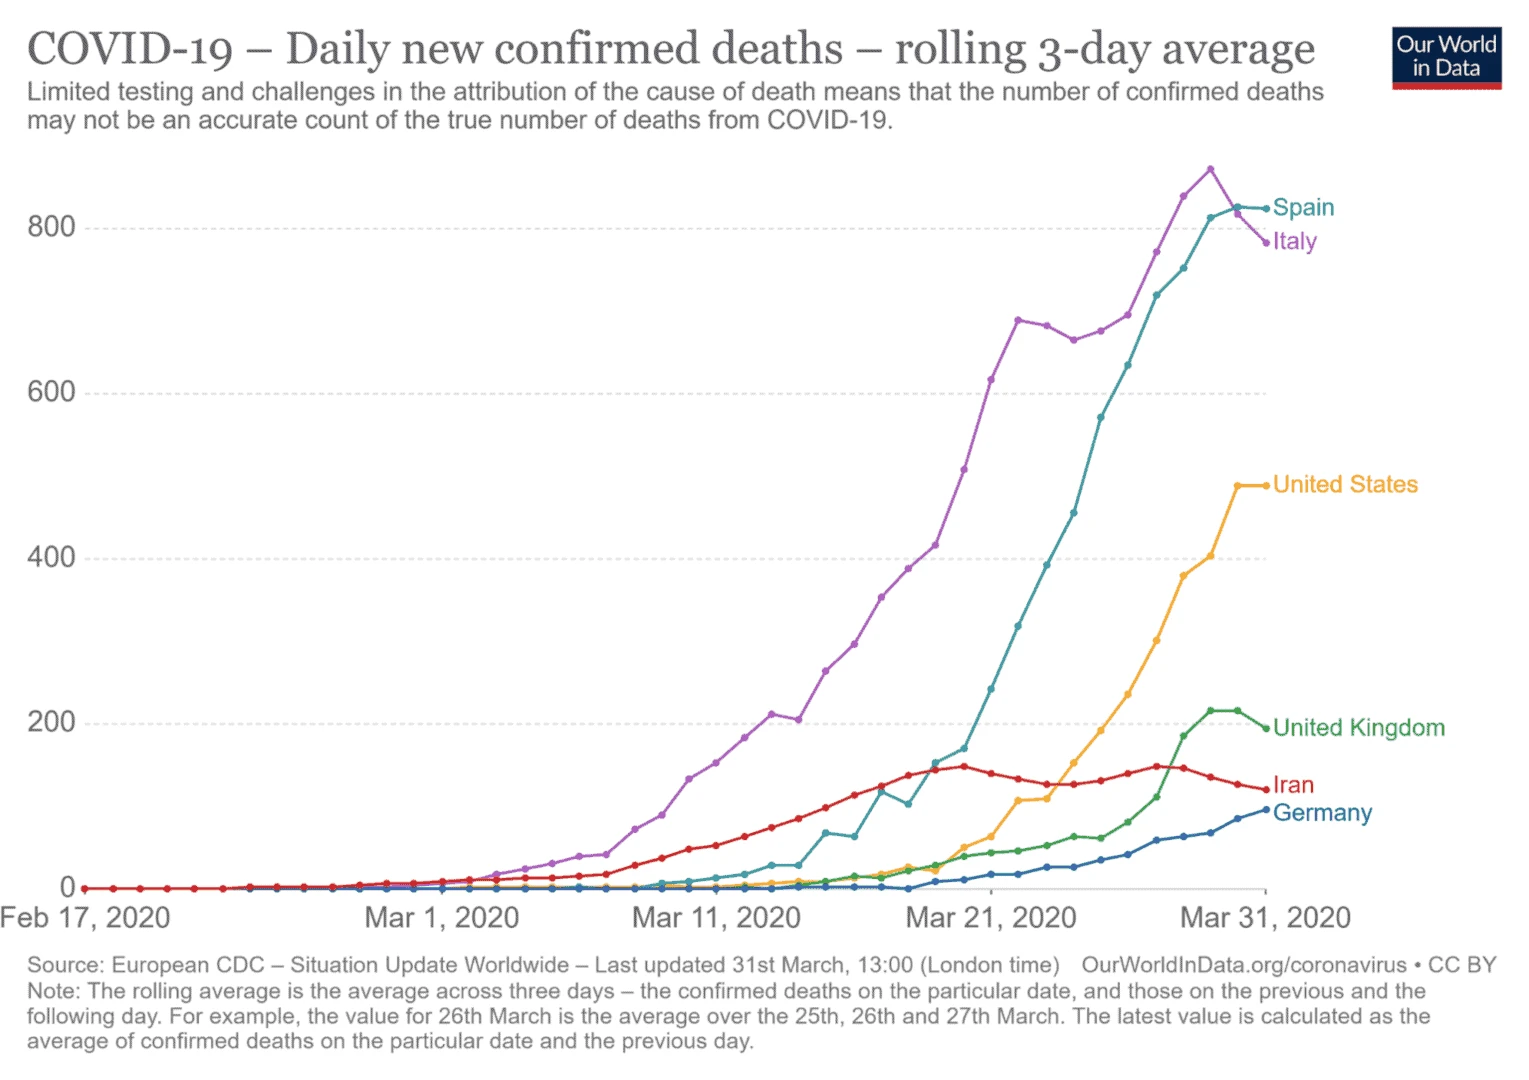 Chart: COVID-19 - Daily new confirmed deaths - rolling 3-day average